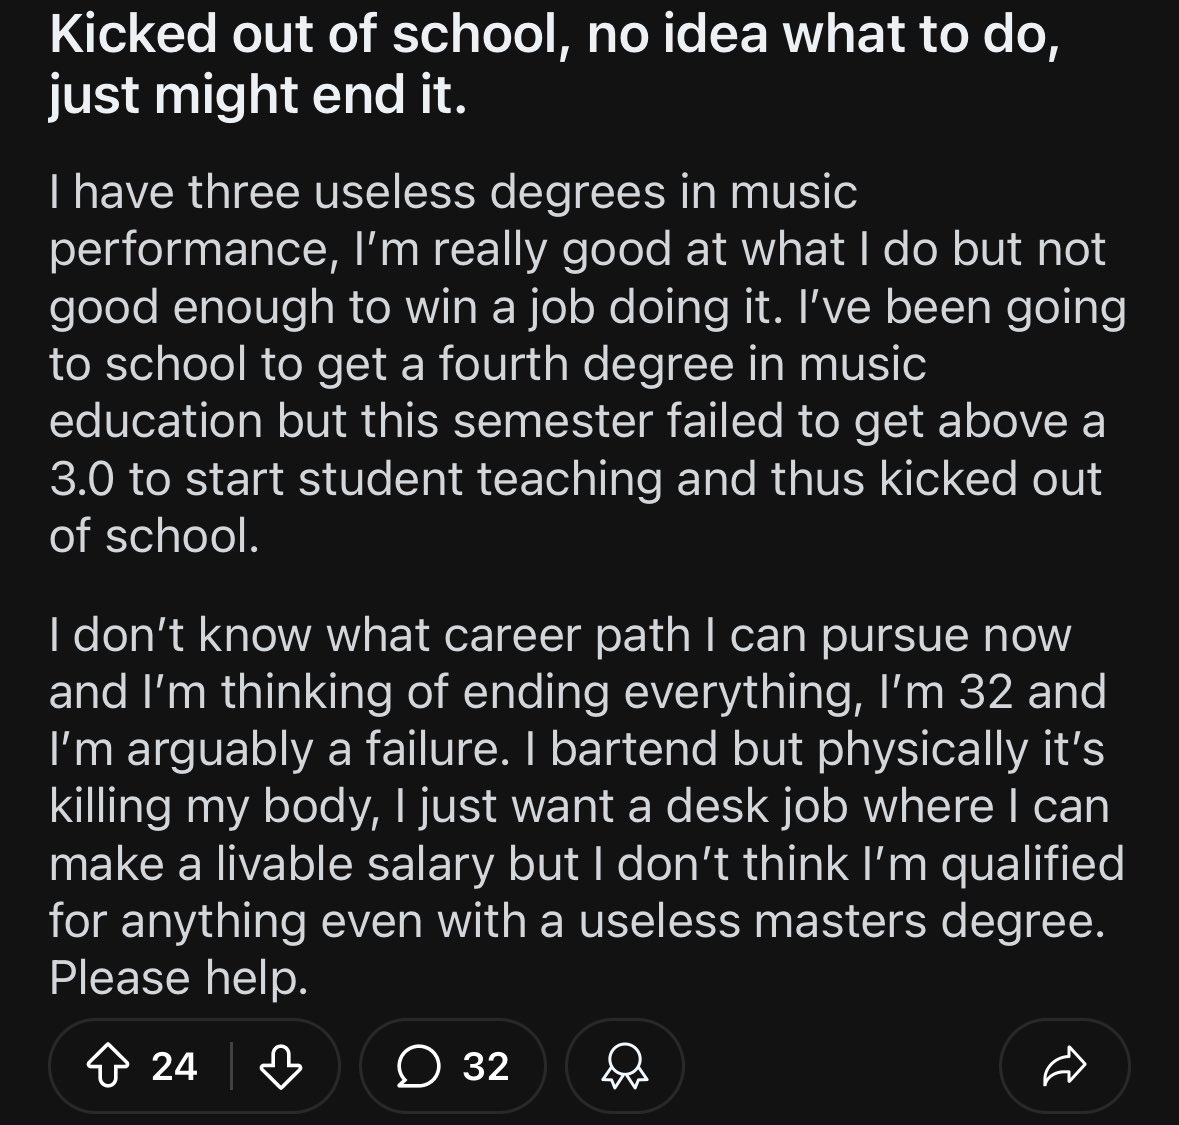 We need to stop gaslighting young people into believing 

Degree = Job/Career

If you’re wondering how people get $100,000 in debt, this is how…

School is all they know…